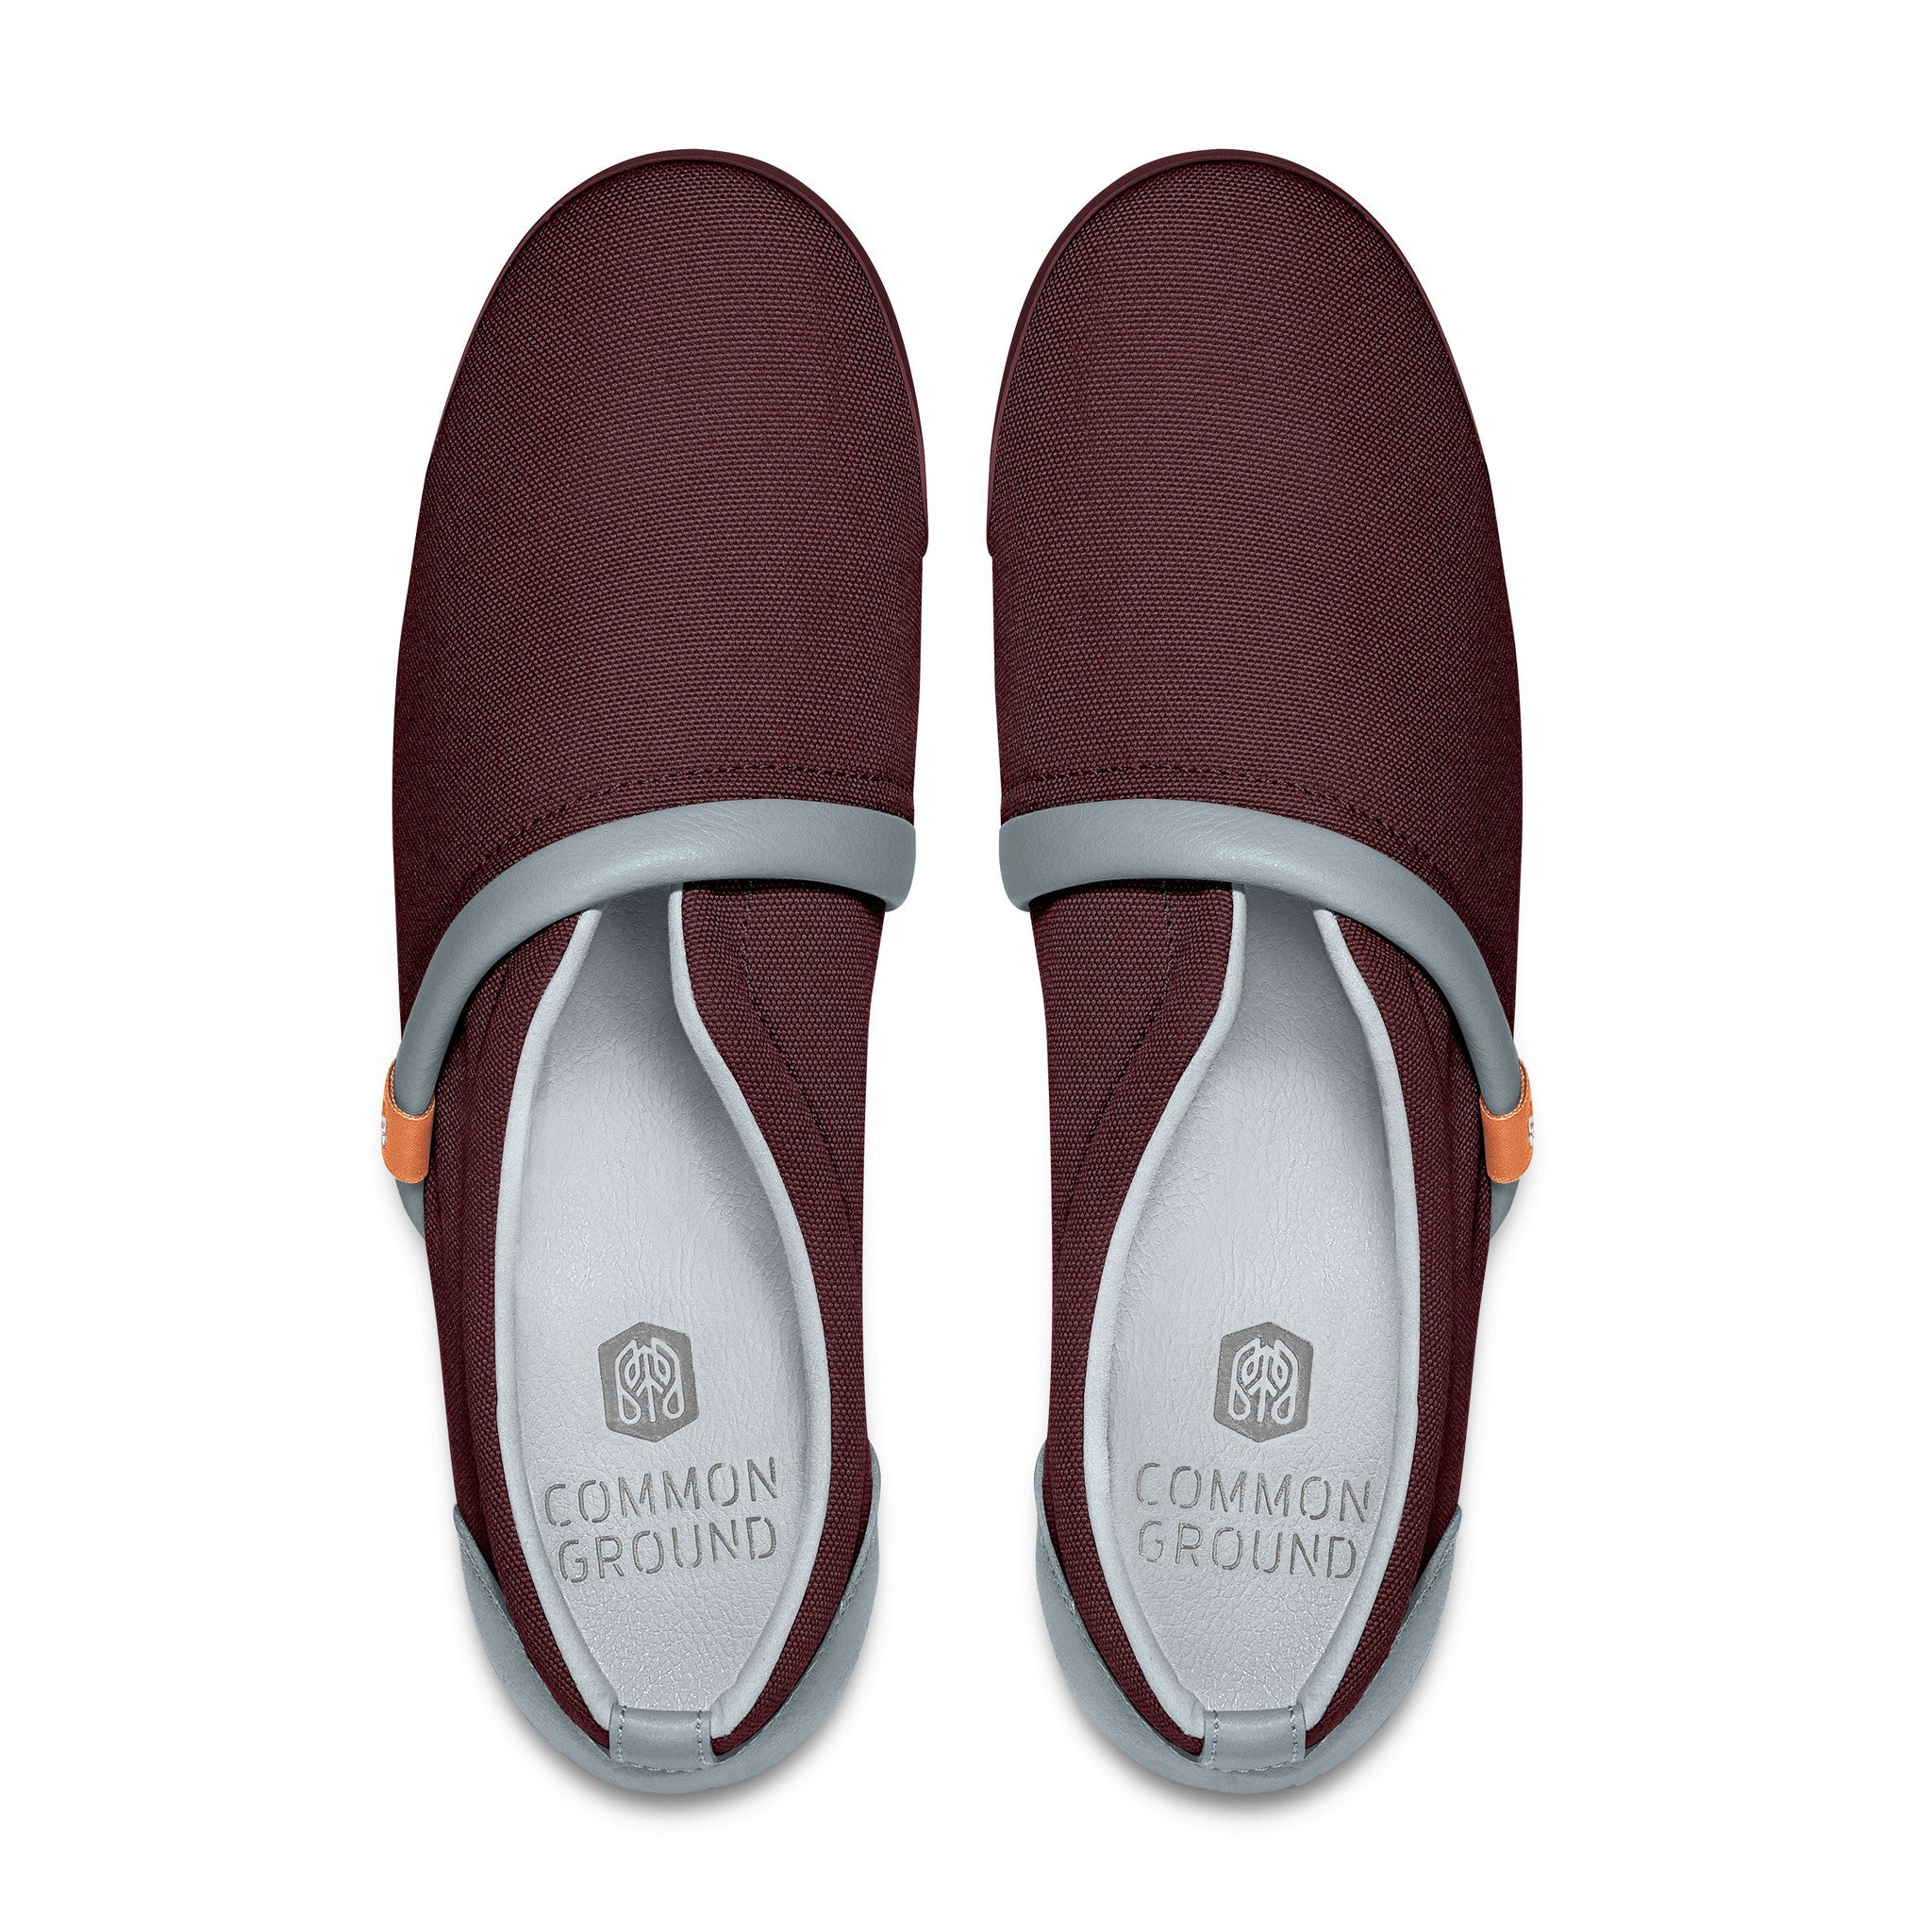 Cabernet - Common Ground Footwear Shoes Top View